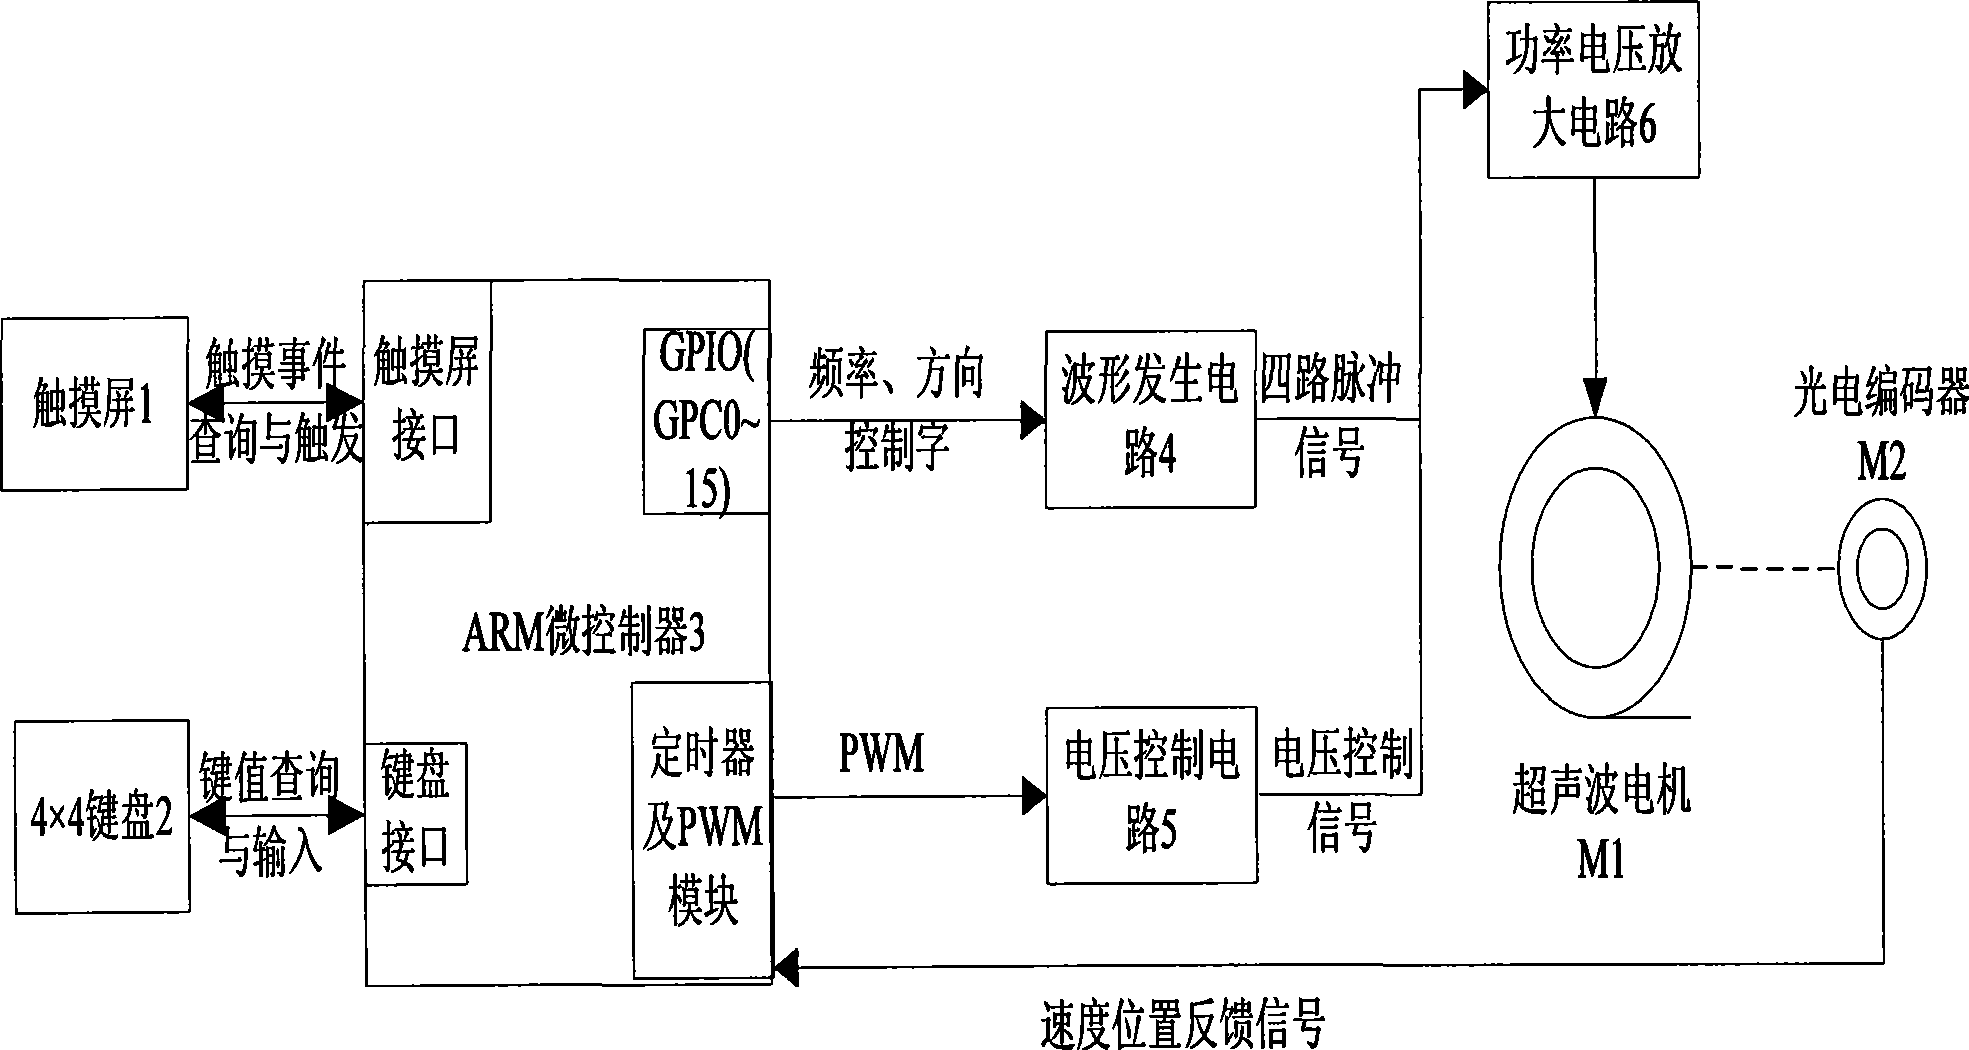 Embedded drive controller based on ARM of ultrasonic motor